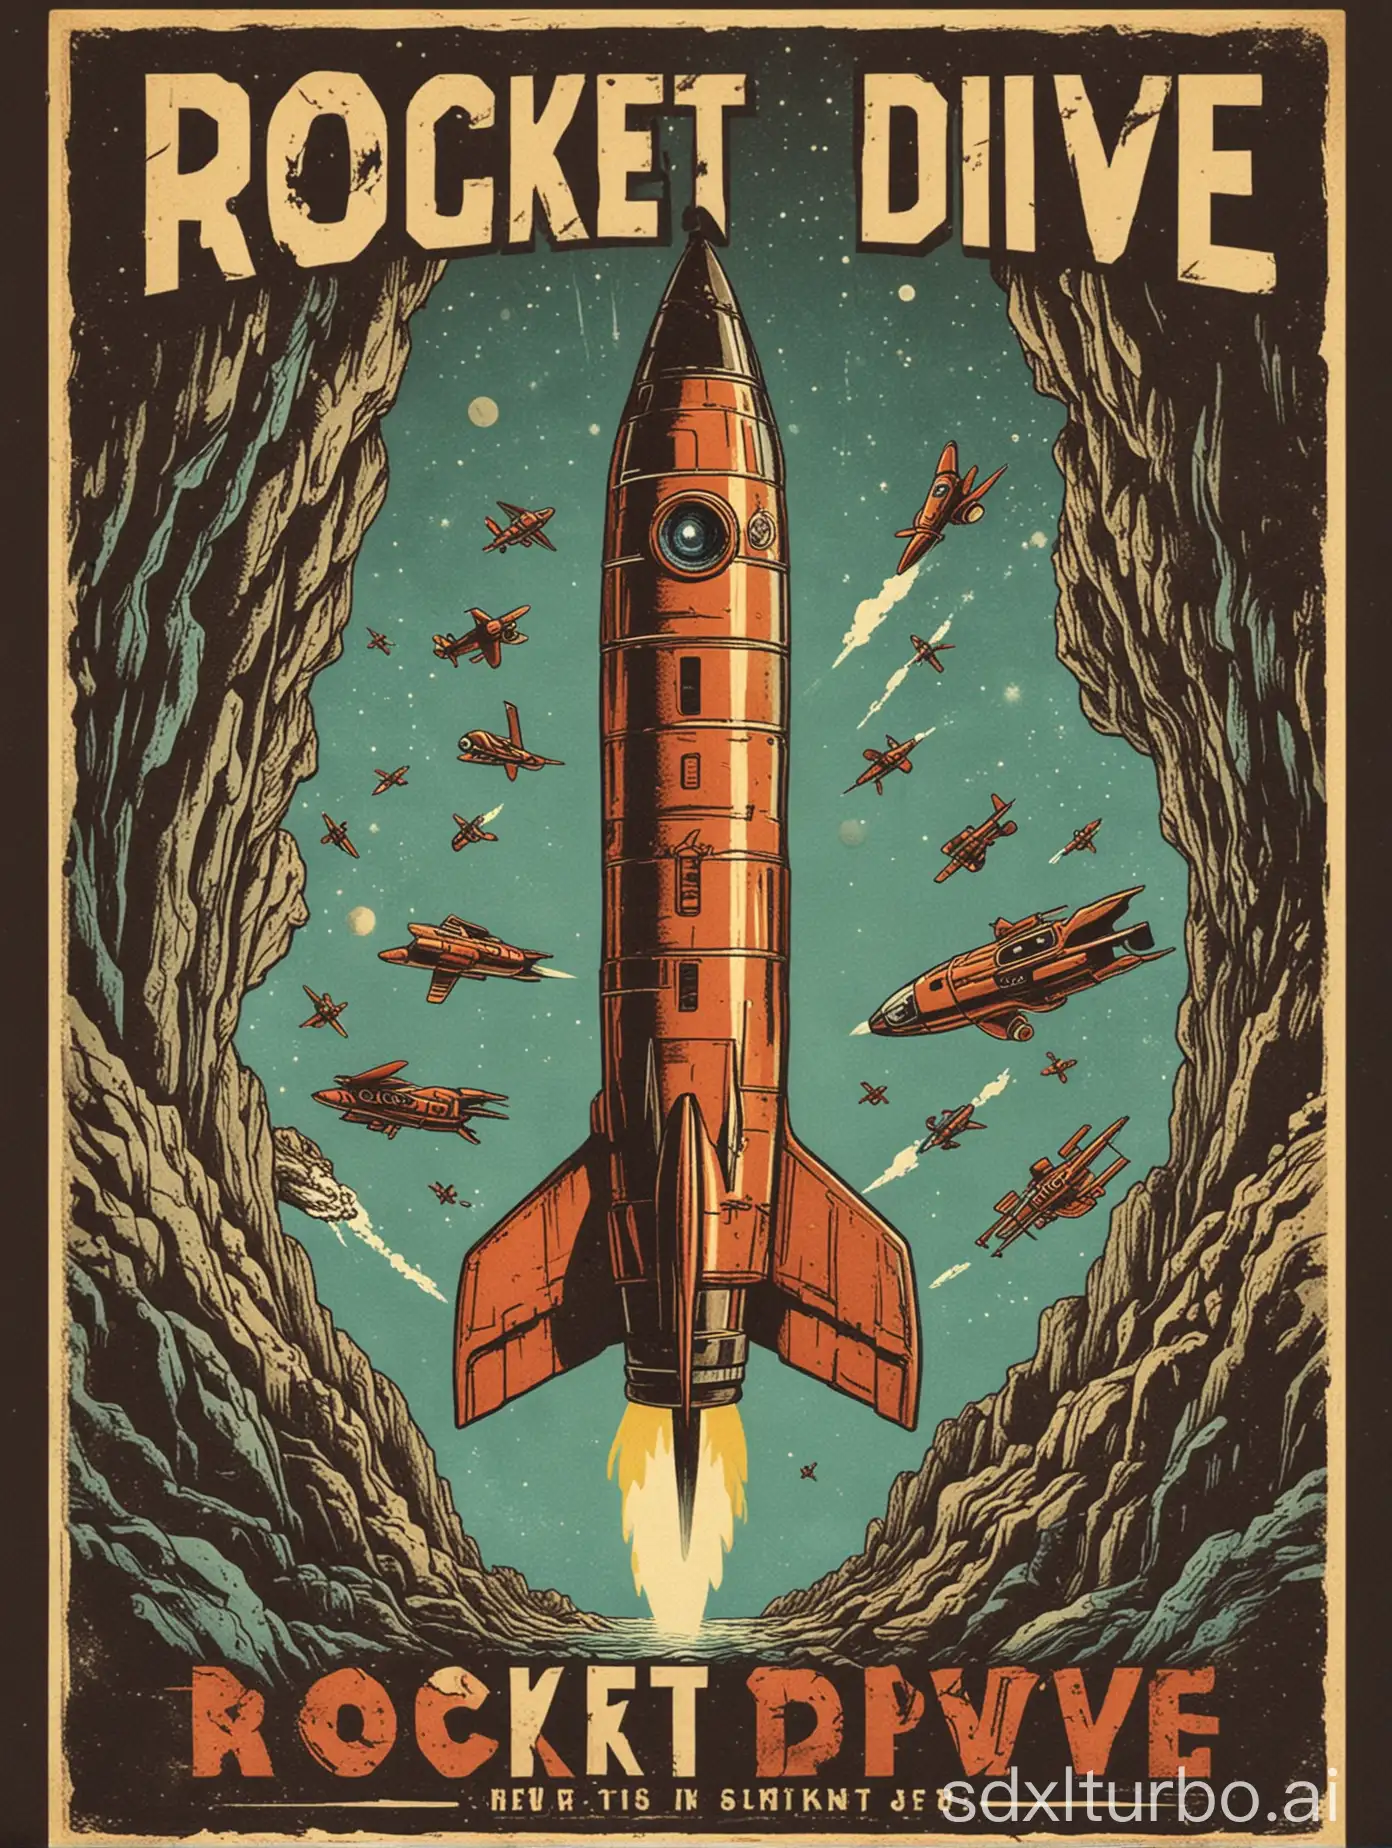 A poster for a rock band called Rocket Dive.